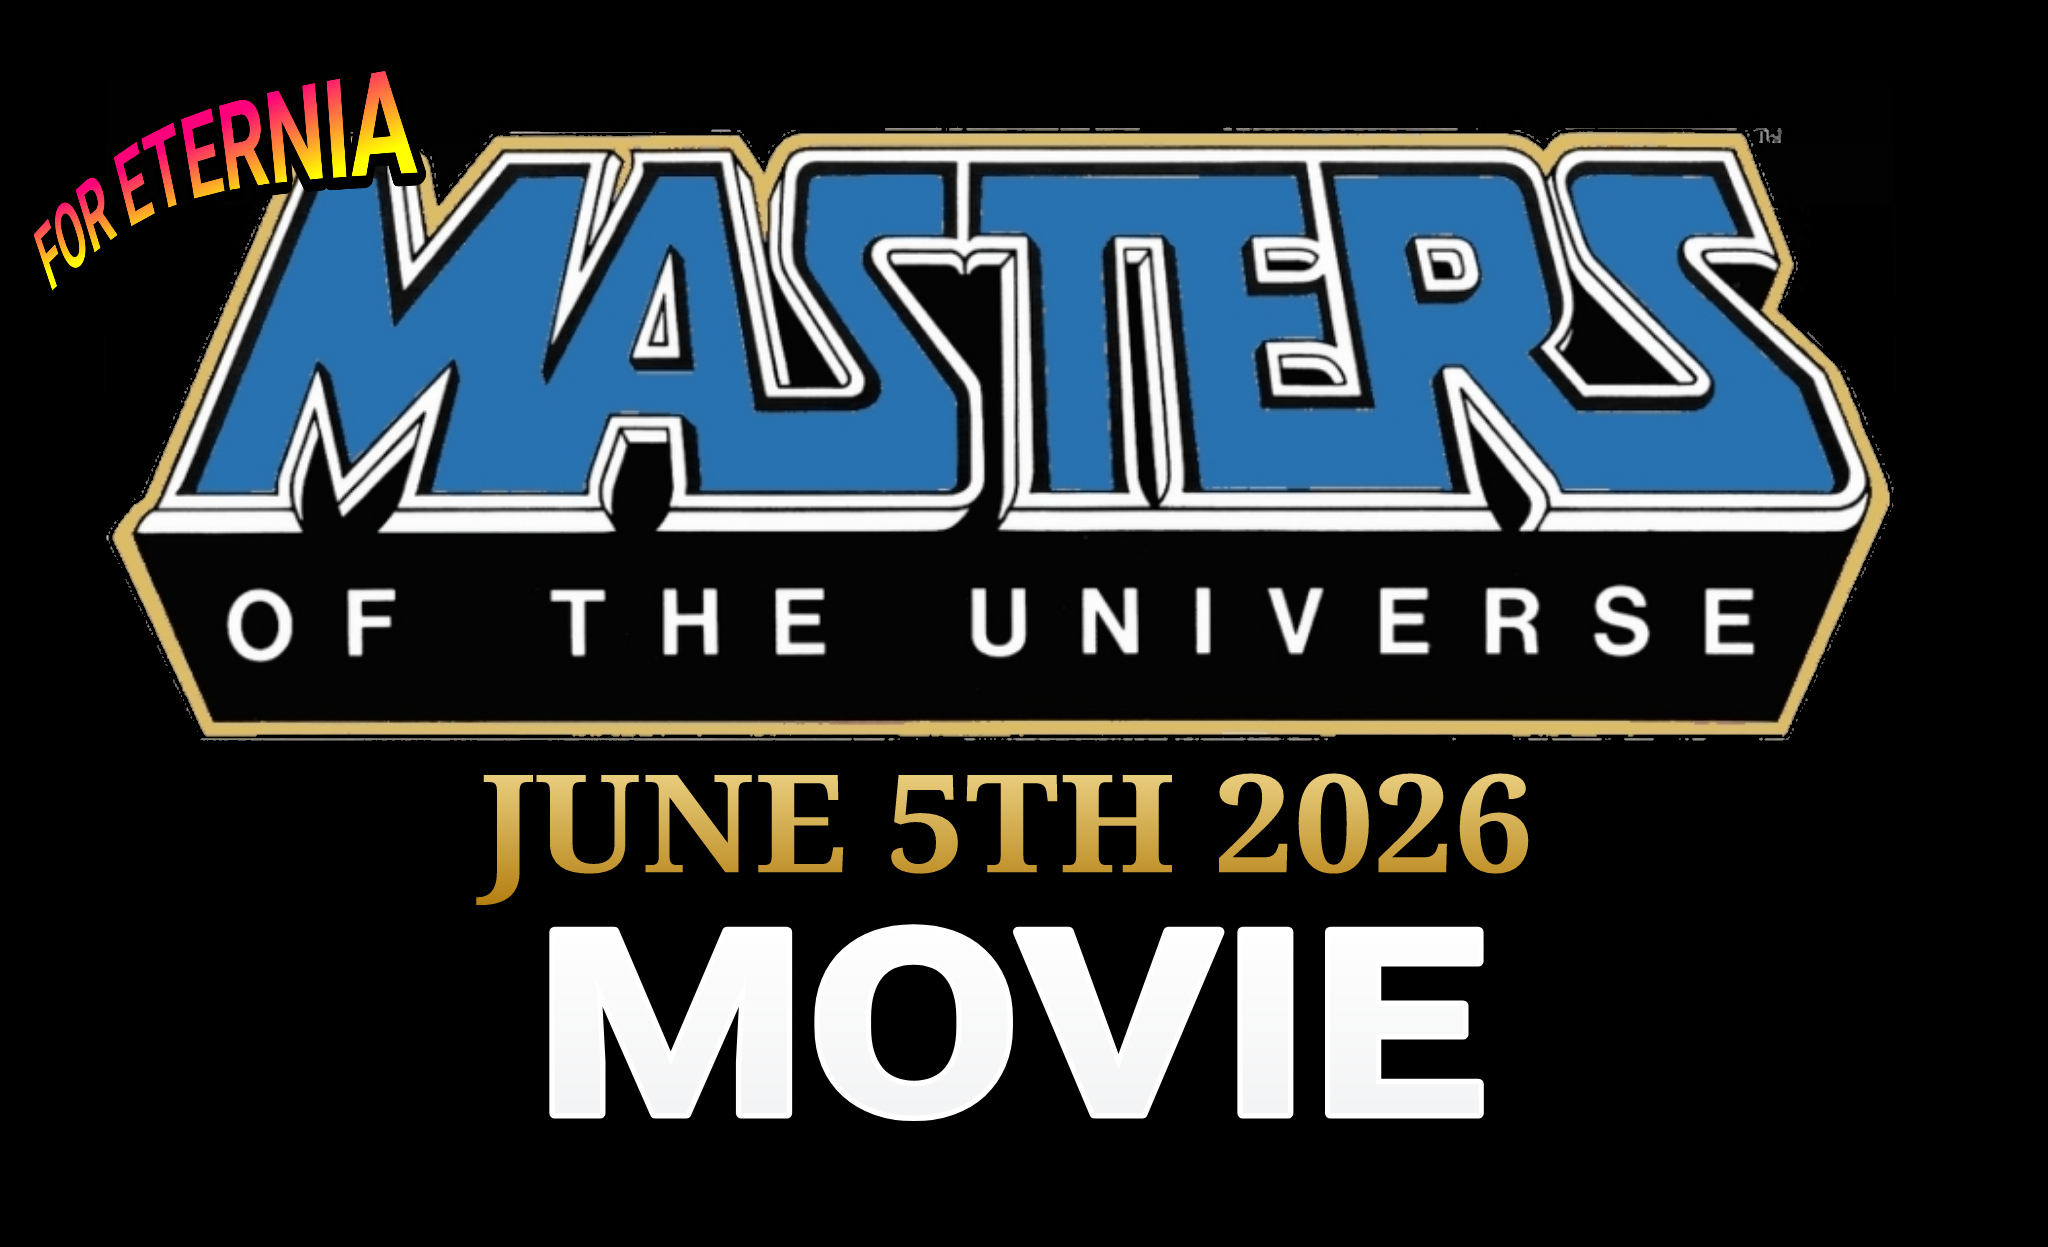 NEW ”Masters of the Universe” MOVIE gets a Release Date: June 5th 2026!